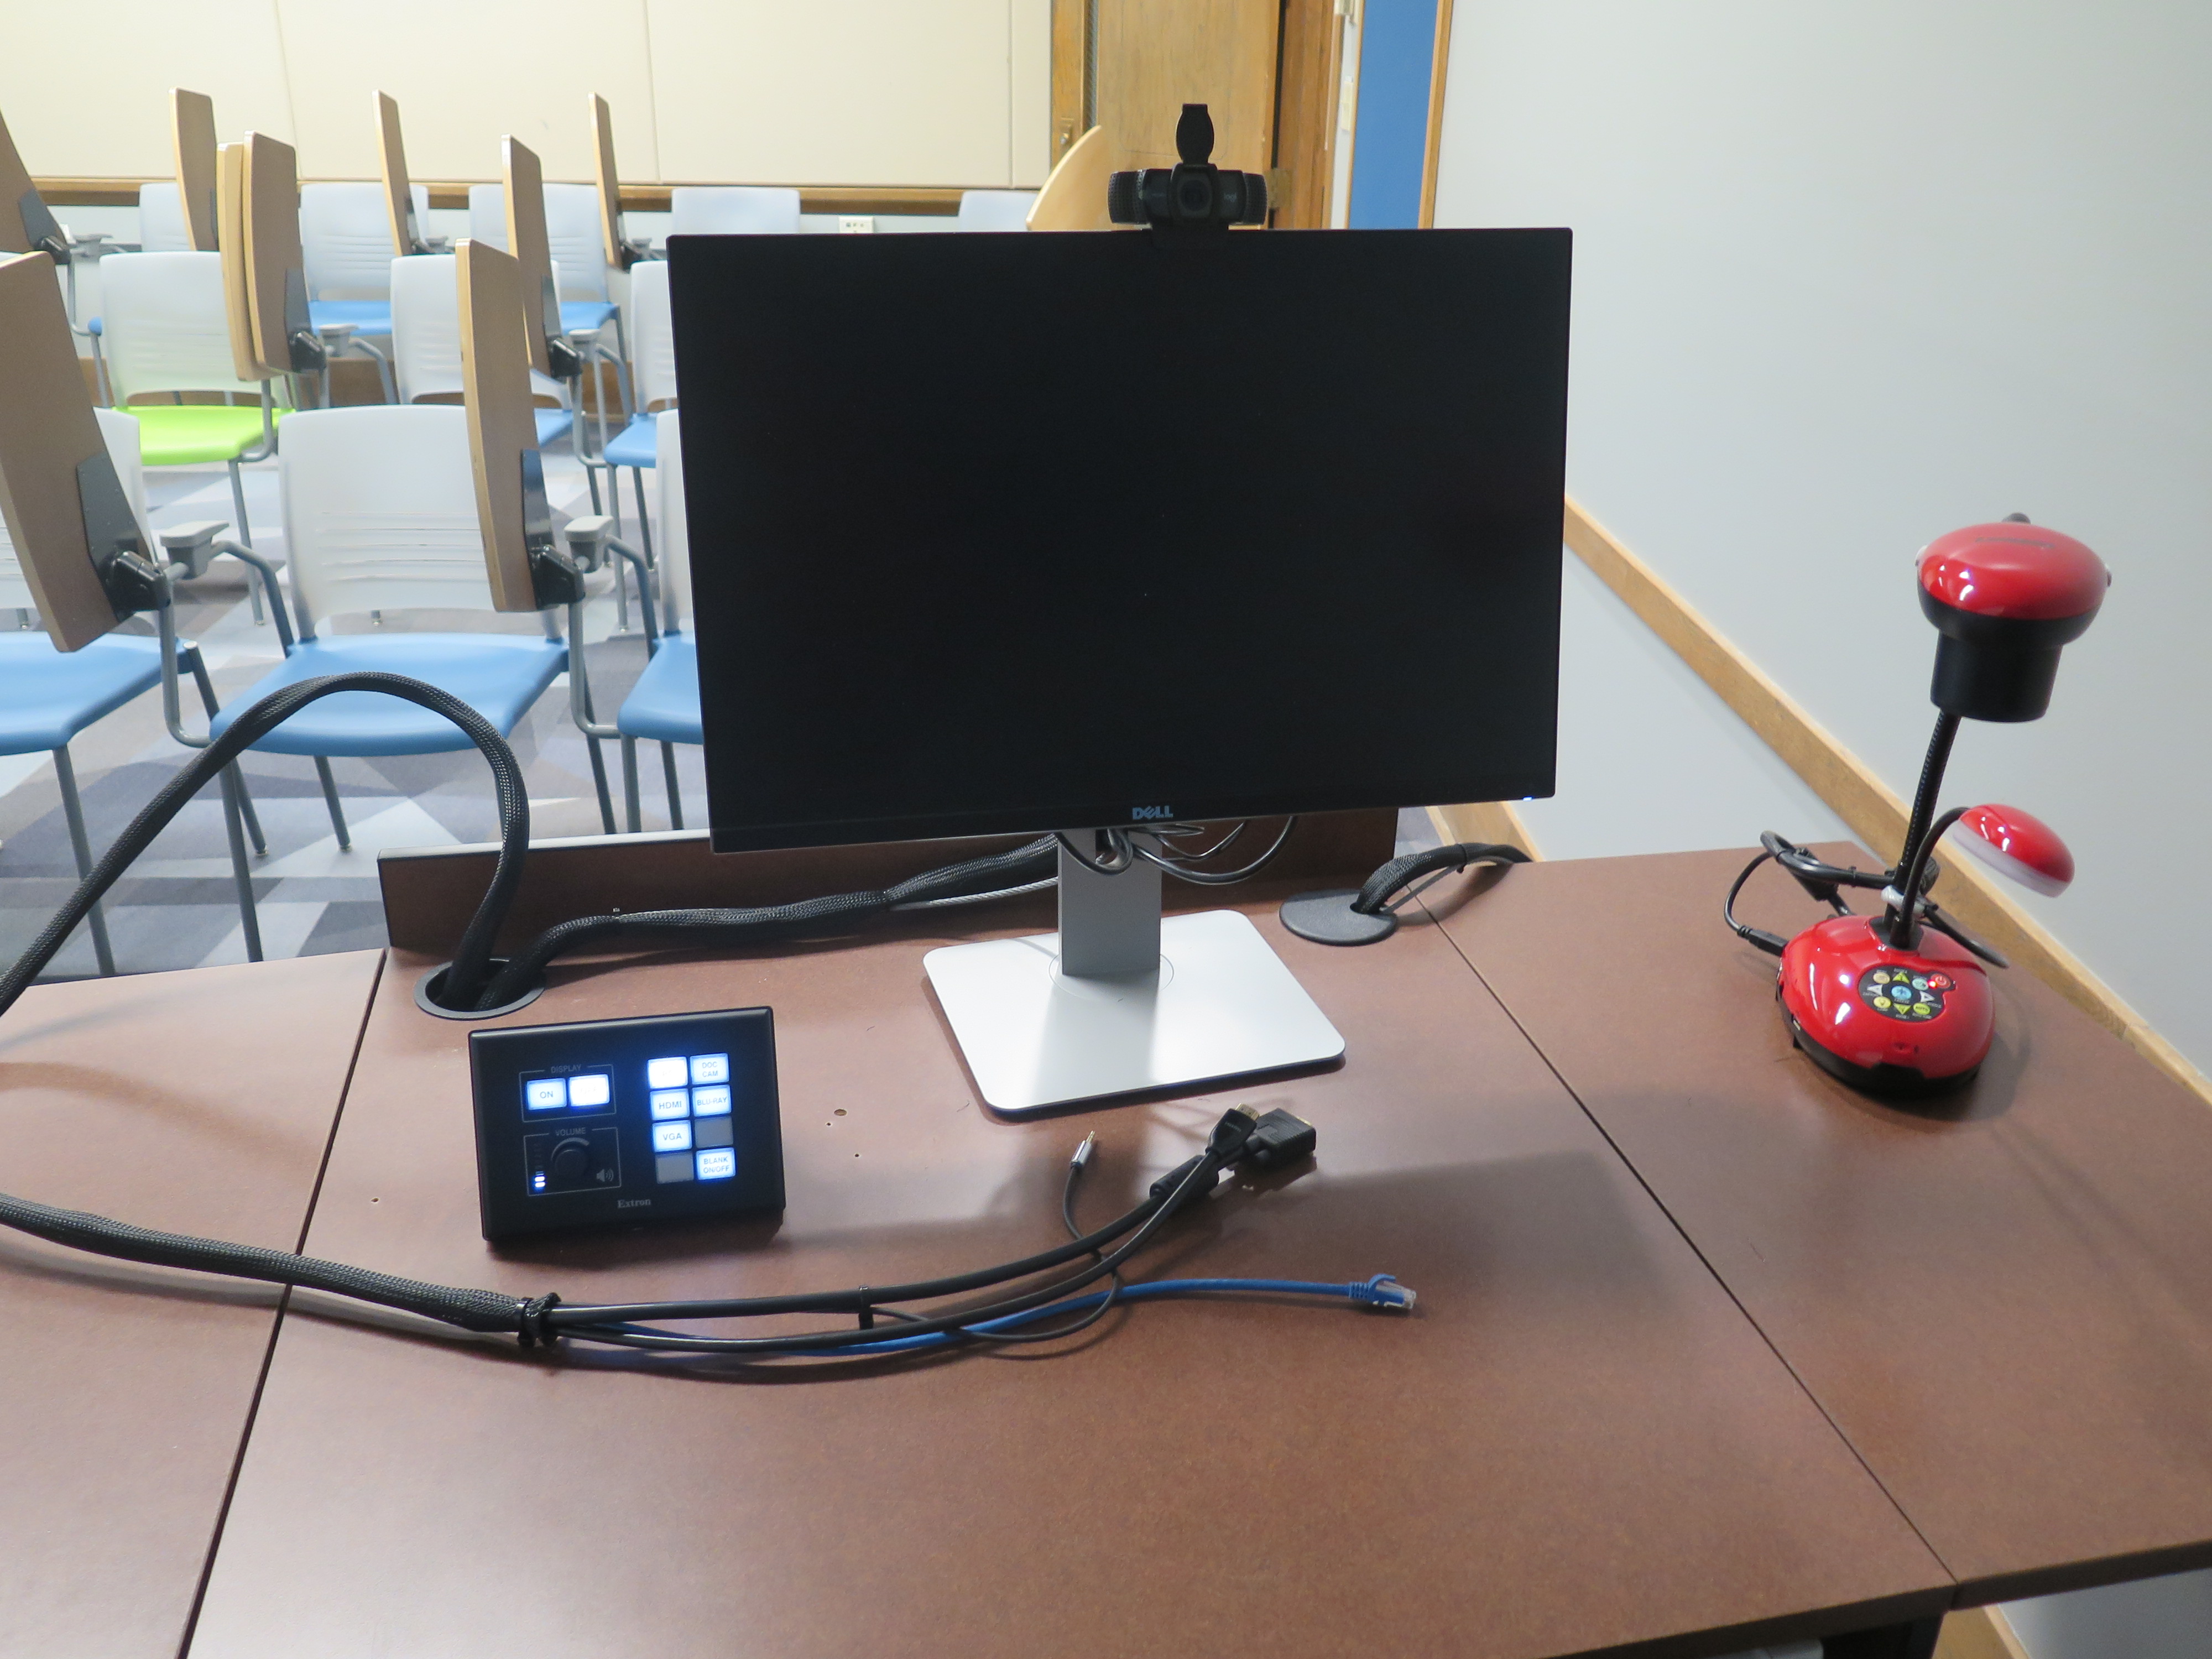 On top of Podium is Logitech 920 Webcam, Dell Computer Monitor, AV Push Button Controller, and Lumens Ladybug Document Camera.